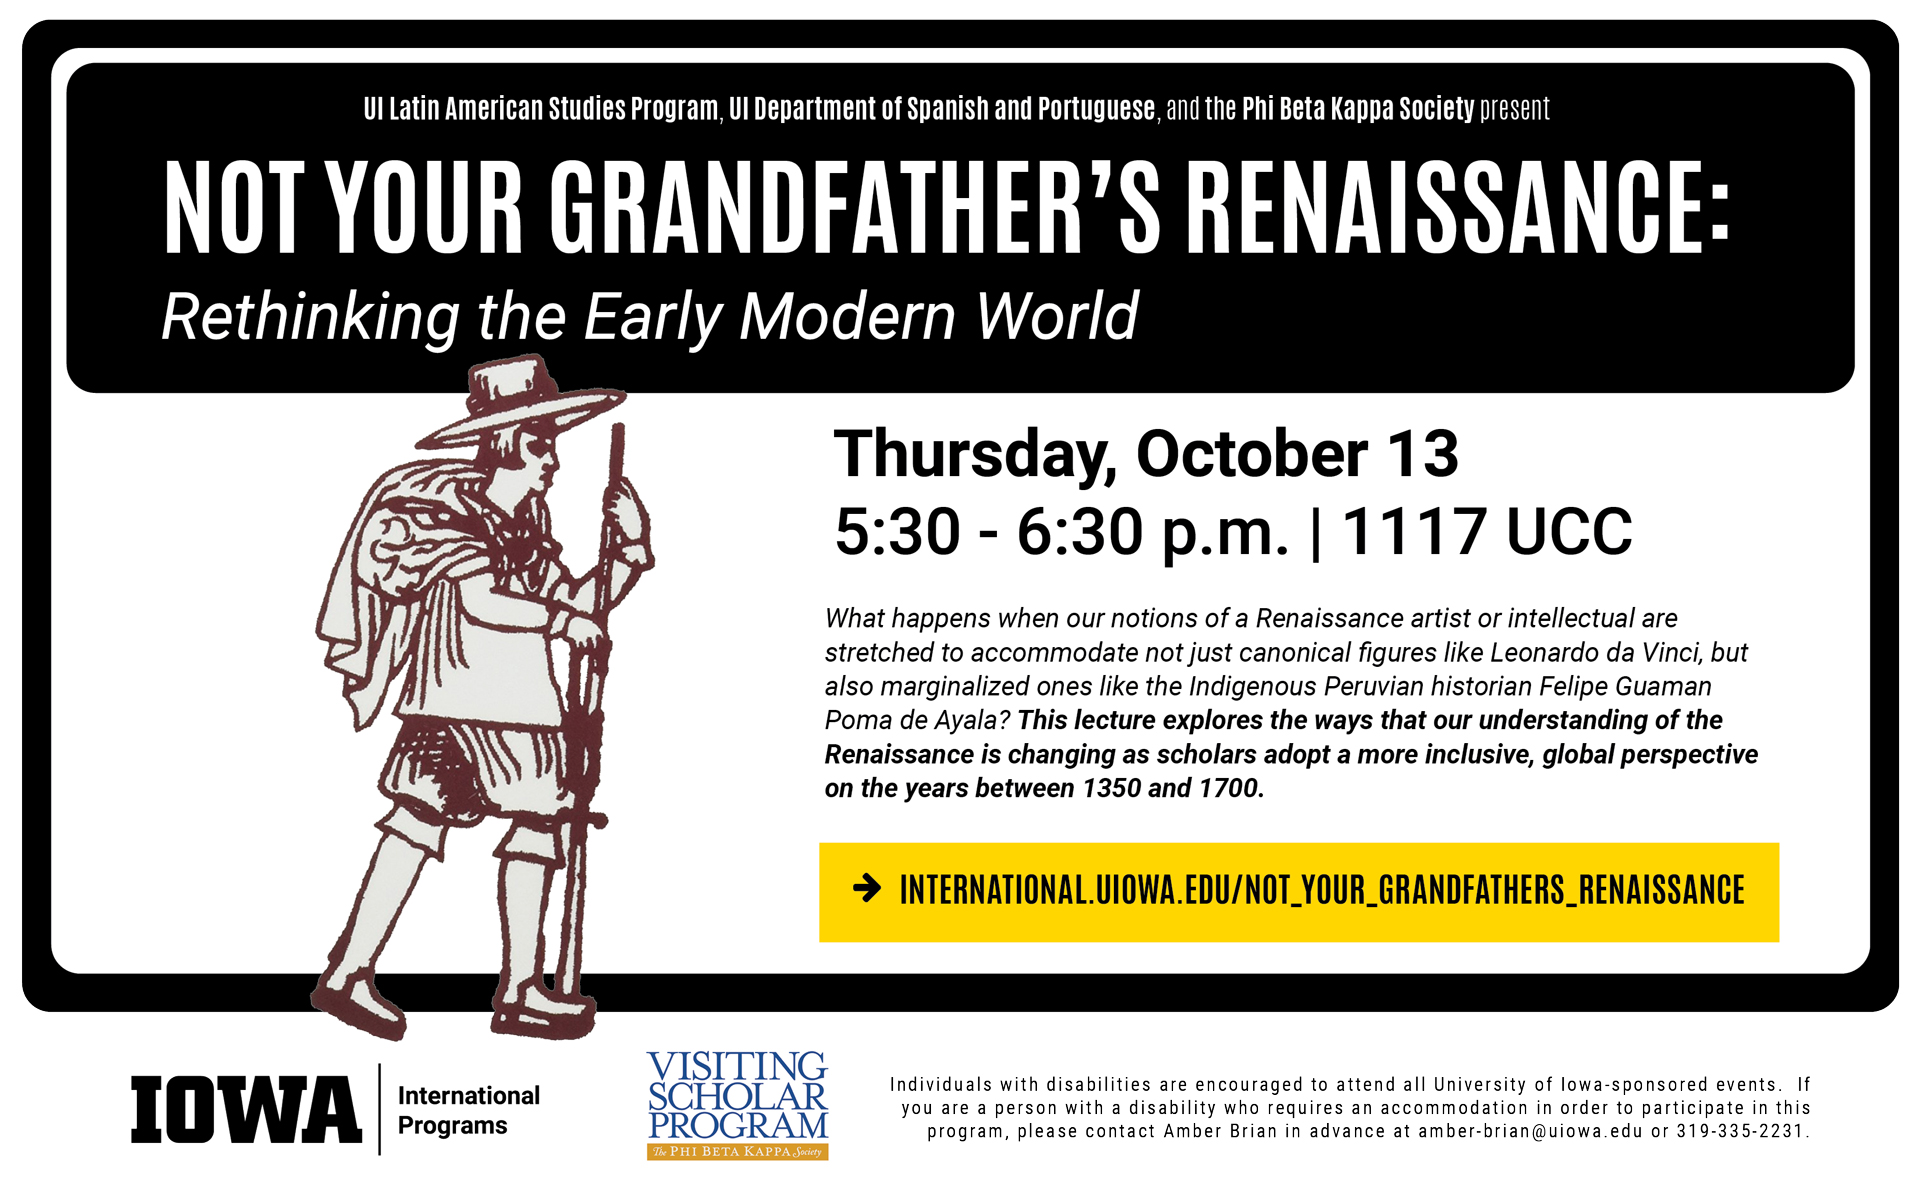 UI Latin American Studies Program, UI Department of Spanish and Portuguese, and the Phi Beta Kappa Society present Not Your Grandfather's Renaissance: Rethinking the Early Modern World. Thursday, October 13, 5:30 to 6:30 pm, in room 1117 UCC. What happens when our notions of a Renaissance artist or intellectual are stretched to accommodate not just canonical figures like Leonardo da Vinci, but also marginalized ones like the Indigenous Peruvian historian Felipe Guaman Poma de Ayala? This lecture explores the ways that our understanding of the Renaissance is changing as scholars adopt a more inclusive, global perspective on the years between 1350 and 1700. Visit website international.uiowa.edu/not_your_grandfathers_renaissance to learn more. Individuals with disabilities are encouraged to attend all University of Iowa sponsored events. If you are a person with a disability who requires an accommodation in order to participate in this program, please contact Amber Brian in advance at amber-brian@uiowa.edu or 319-335-2231. 